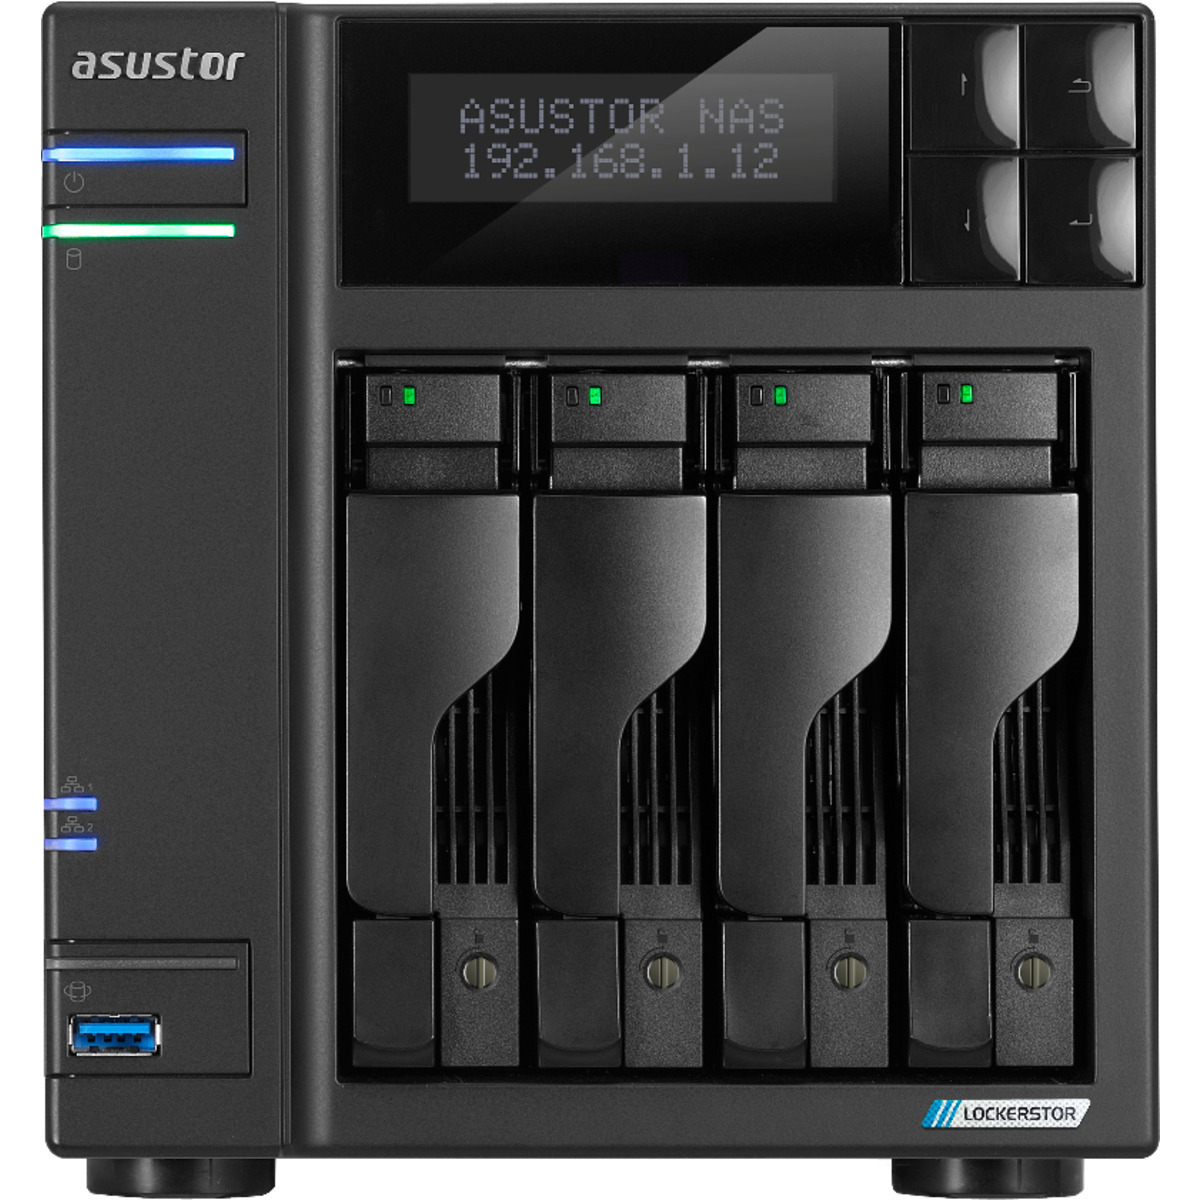 ASUSTOR LOCKERSTOR 4 Gen2 AS6704T 40tb 4-Bay Desktop Multimedia / Power User / Business NAS - Network Attached Storage Device 4x10tb Seagate IronWolf Pro ST10000NT001 3.5 7200rpm SATA 6Gb/s HDD NAS Class Drives Installed - Burn-In Tested - ON SALE - FREE RAM UPGRADE LOCKERSTOR 4 Gen2 AS6704T